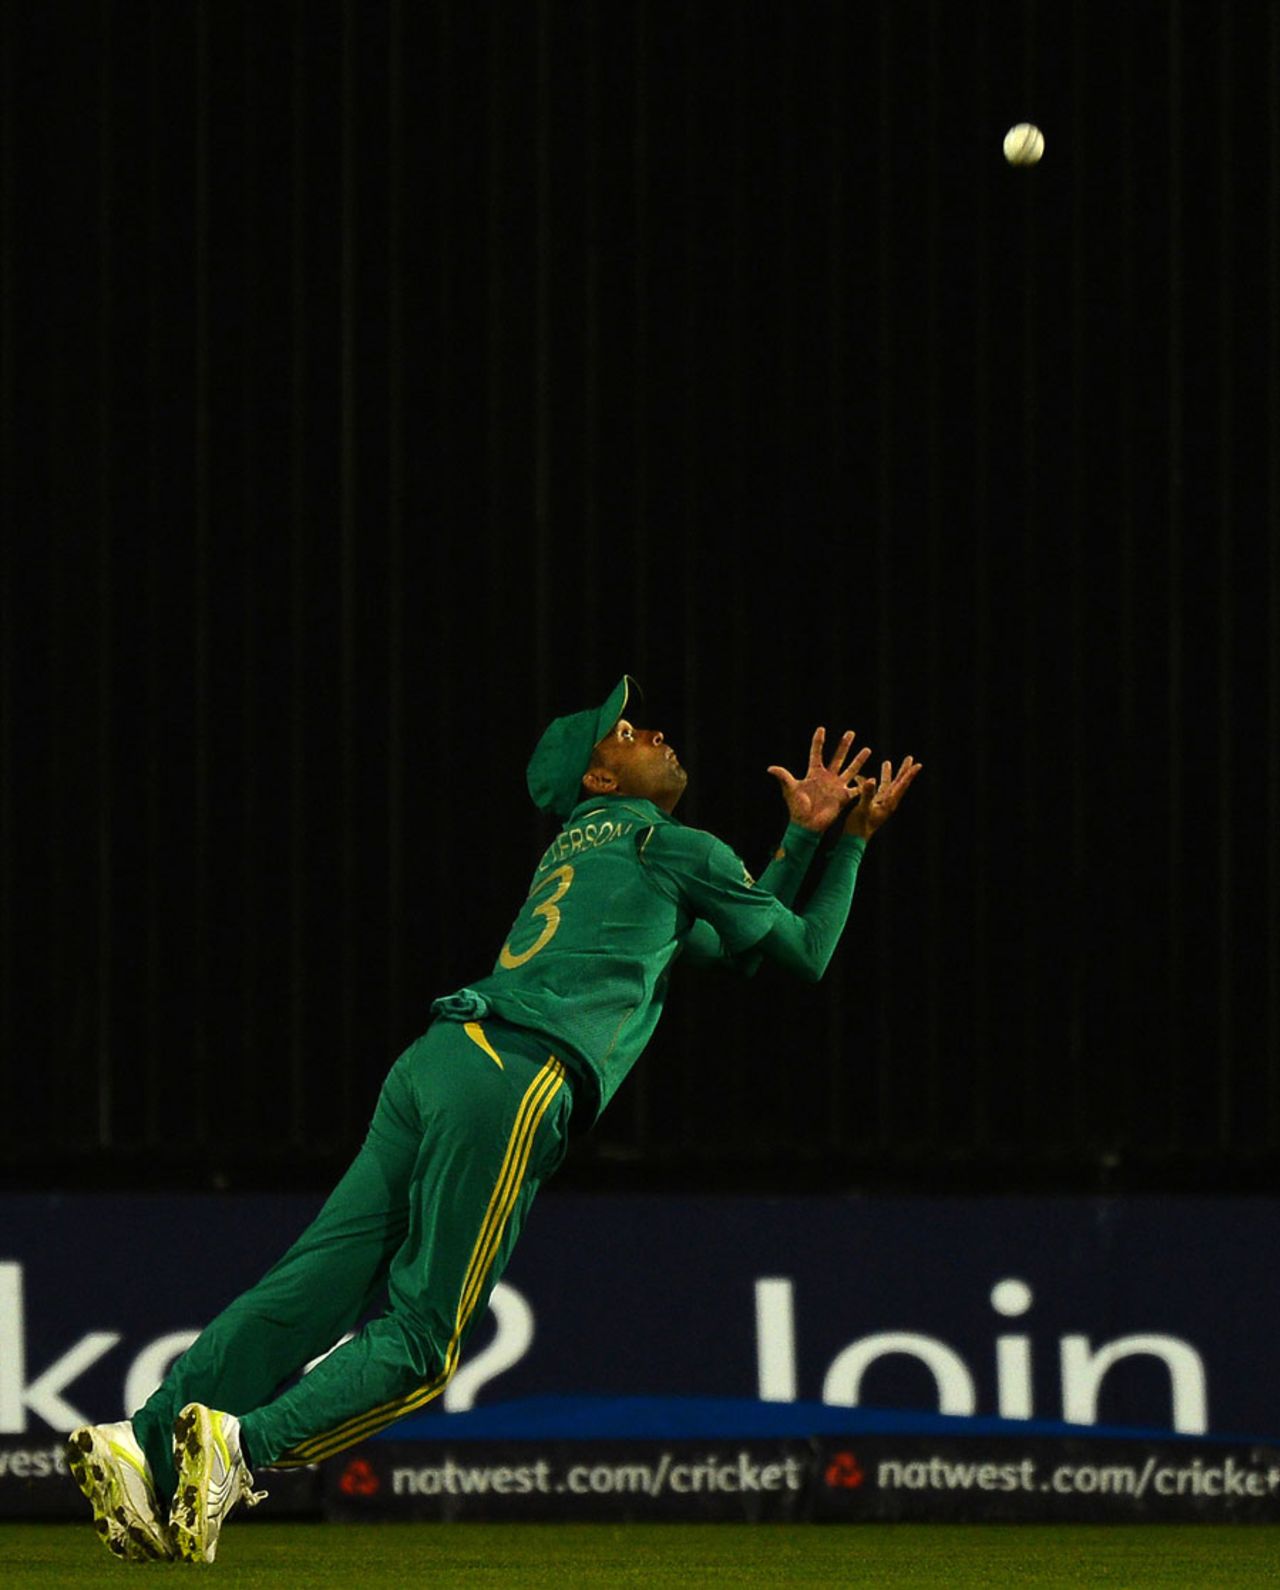 Robin Peterson throws himself forward to catch Craig Kieswetter, England v South Africa, 2nd NatWest T20I, Old Trafford, September 10, 2012